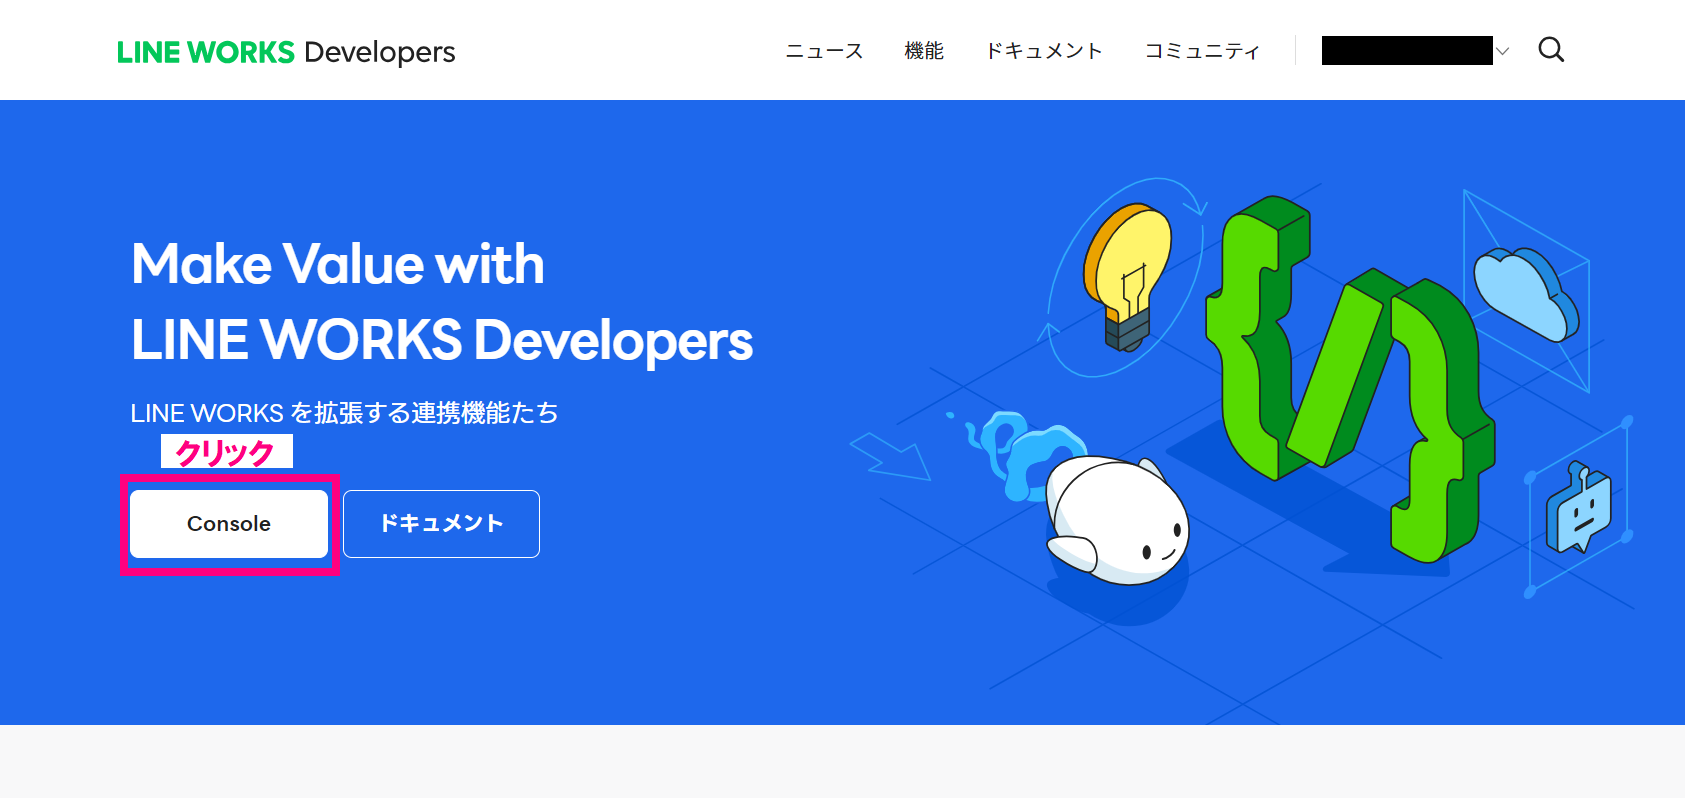 step1_LINE WORKS Developers Consoleクリック.png